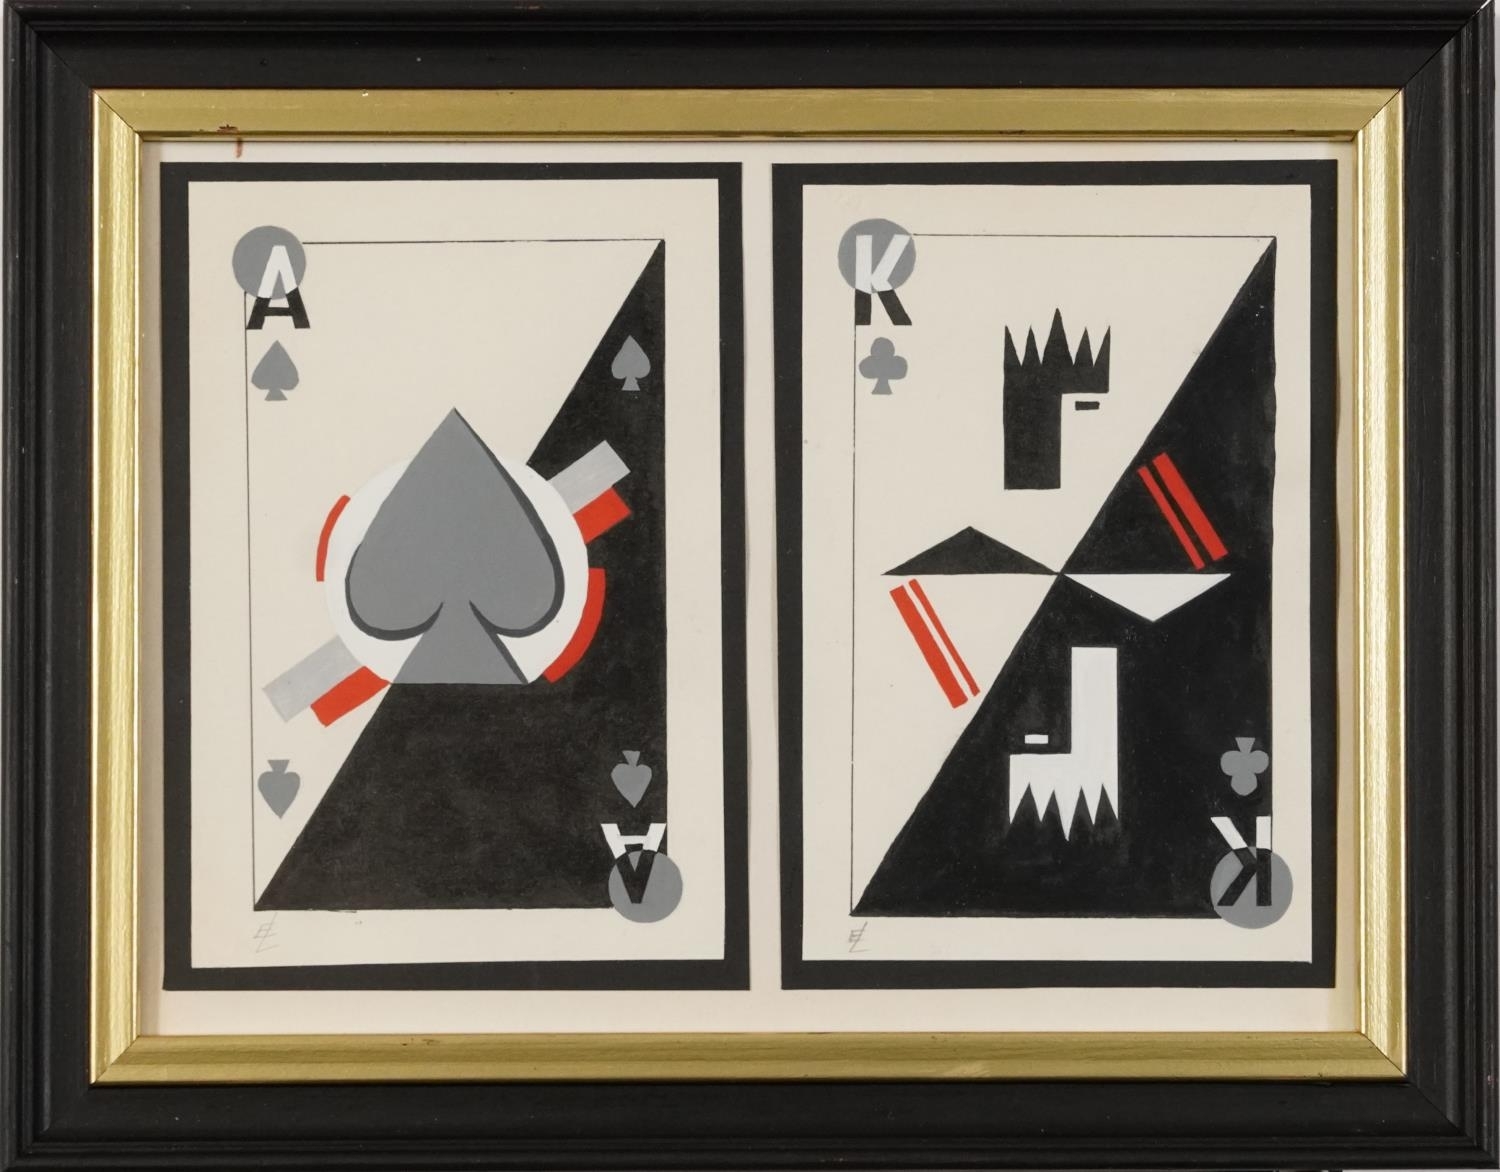 Artwork by El Lissitzky, Playing Cards, Made of mixed media